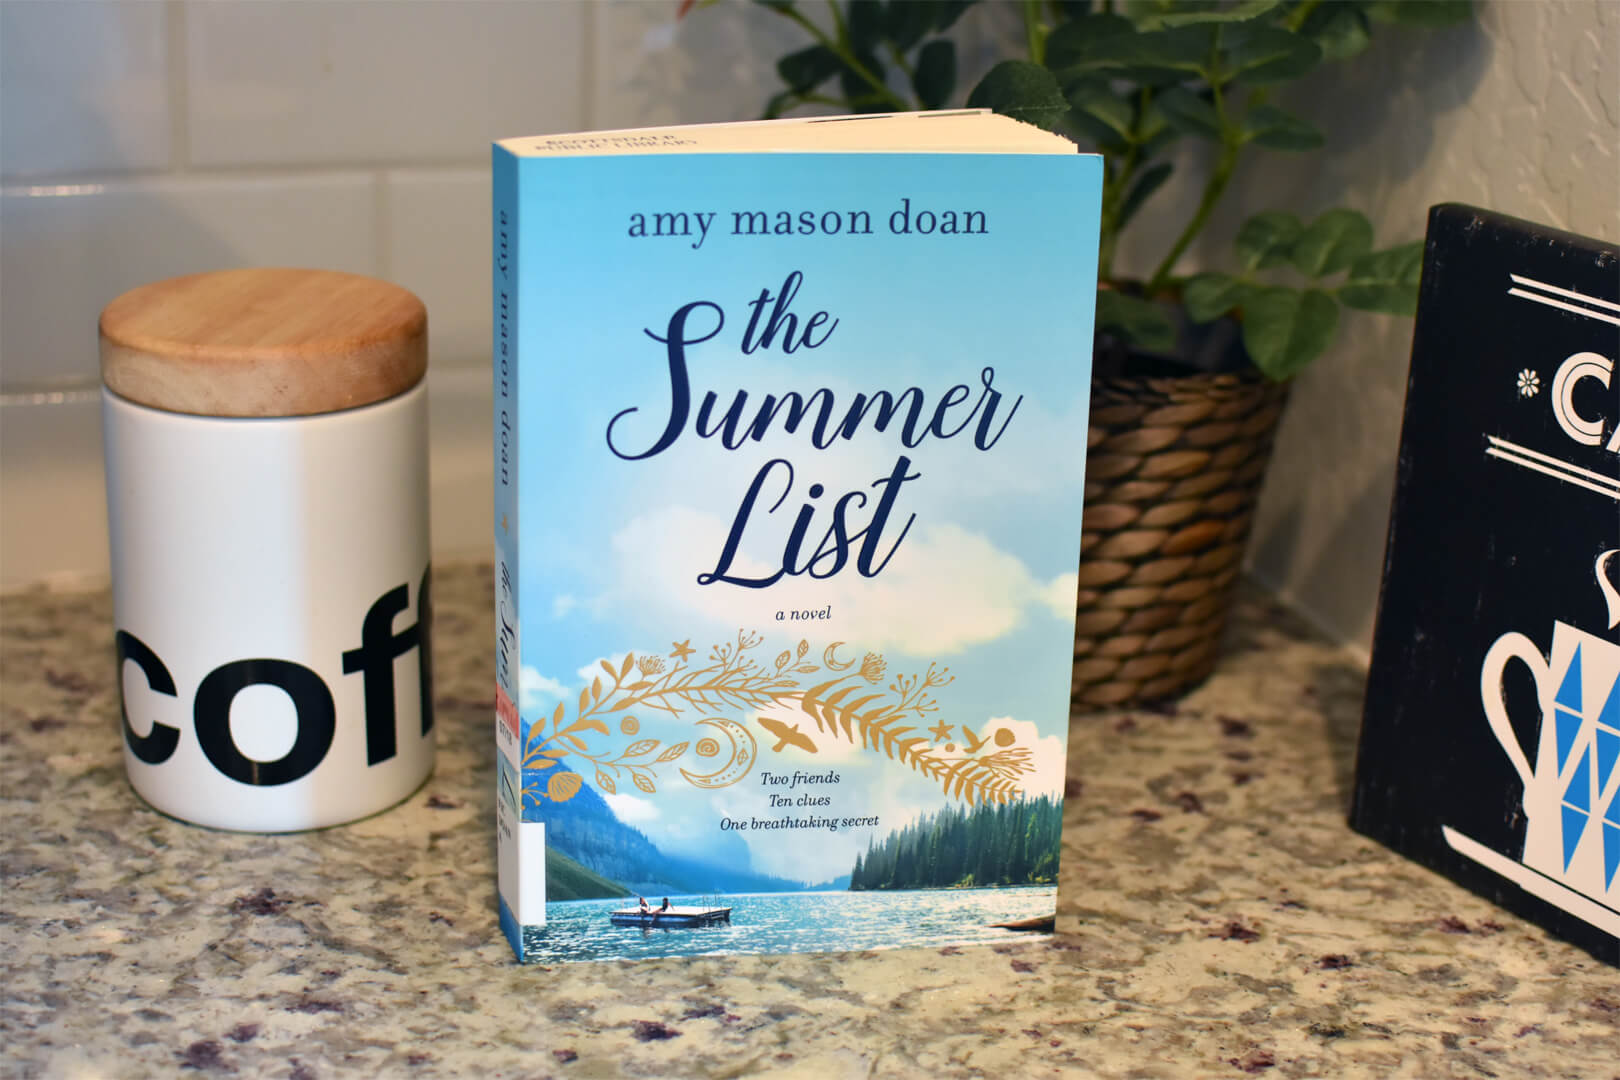 Preview: The Summer List by Amy Mason Doan